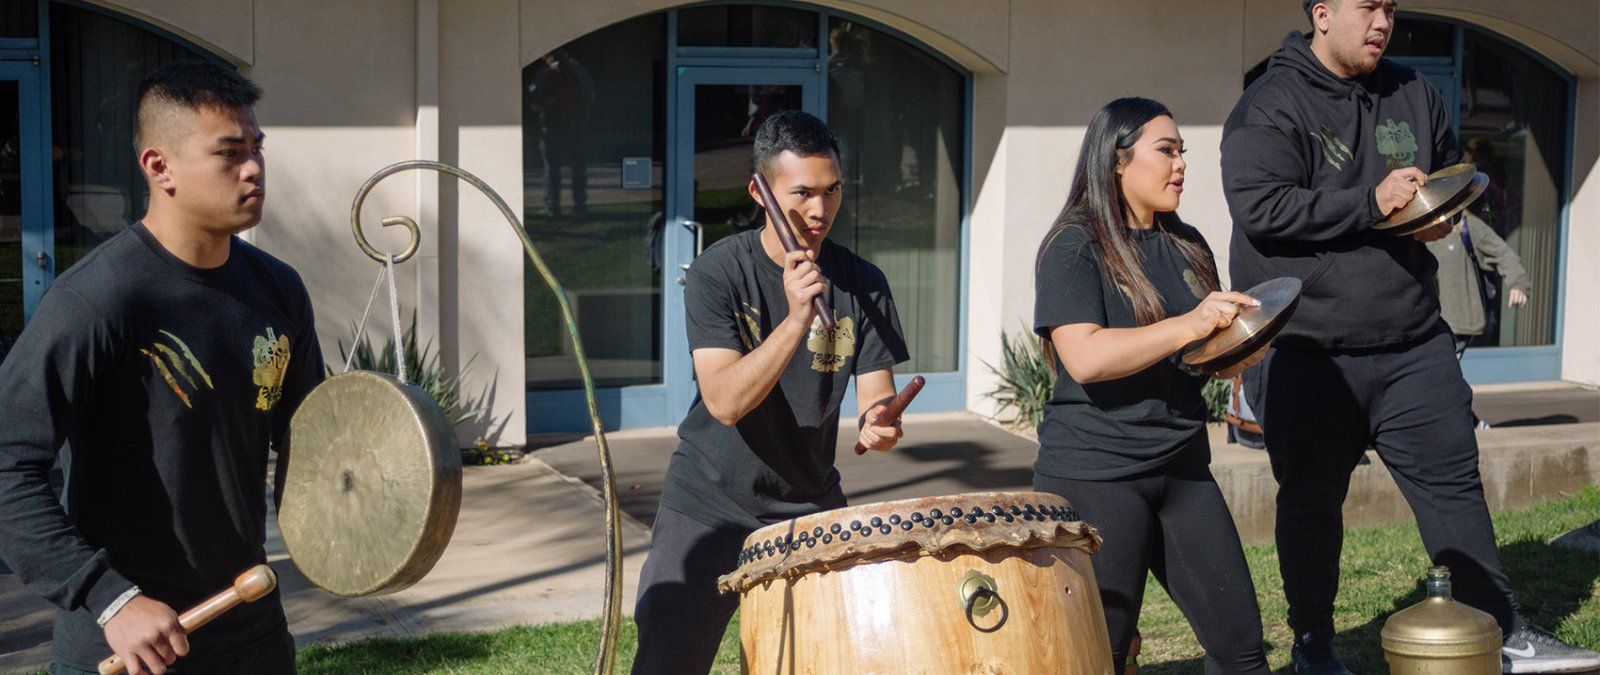 The Asian Student Union club performs with drums and cymbals on the Campus Mall